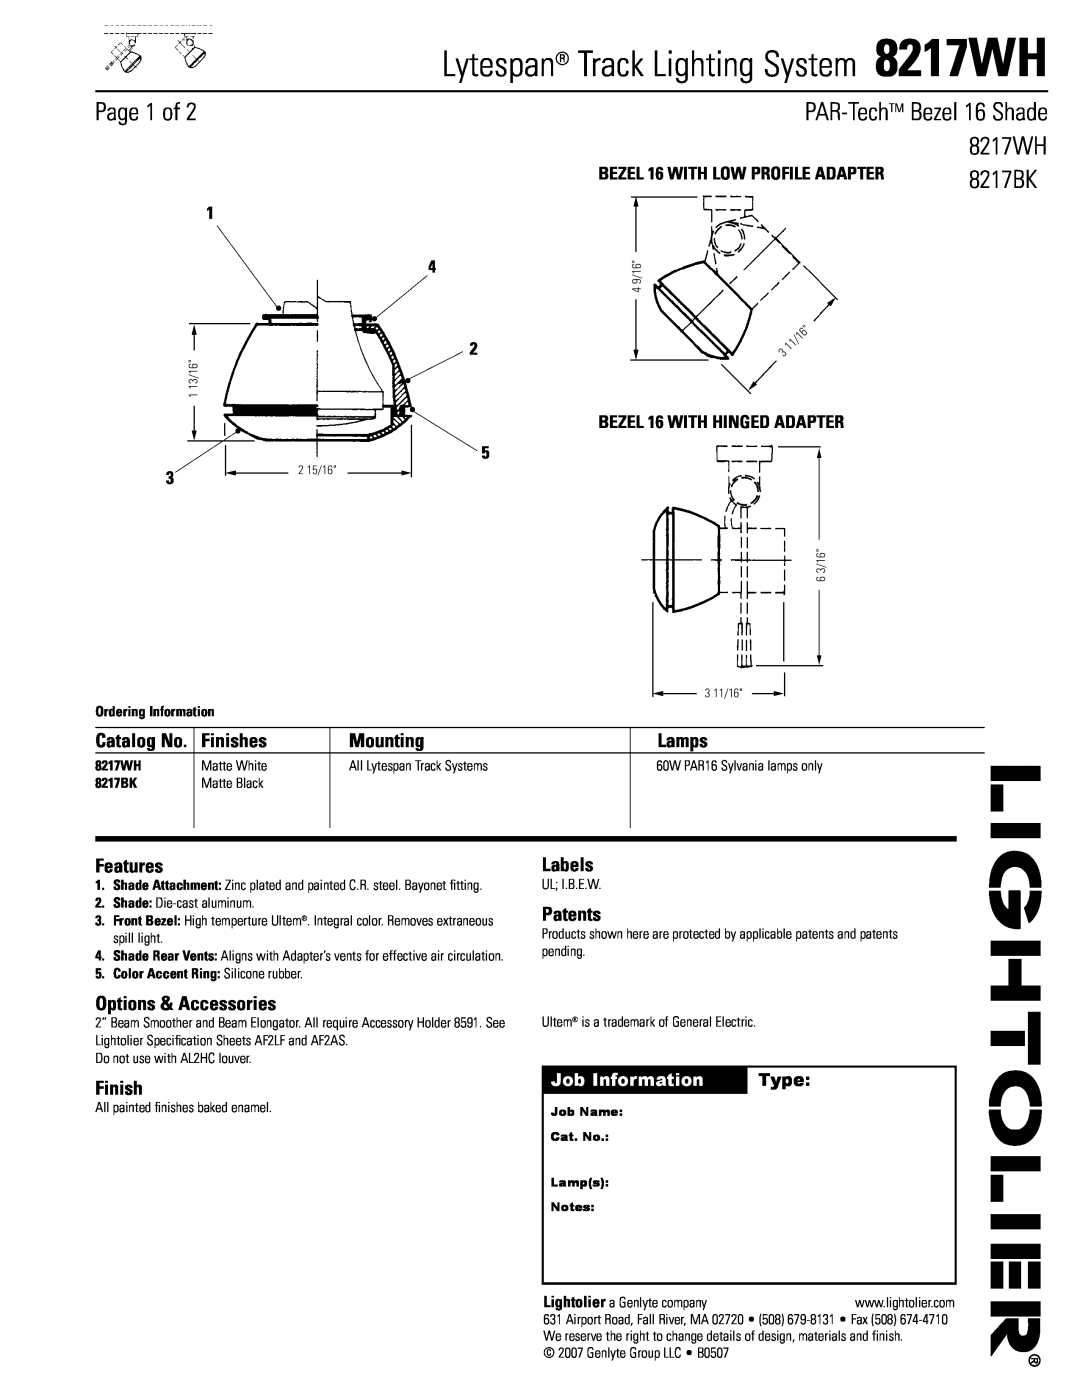 Lightolier 8217WH specifications Page 1 of, Finishes, Mounting, Features, Labels, Patents, Options & Accessories, Type 